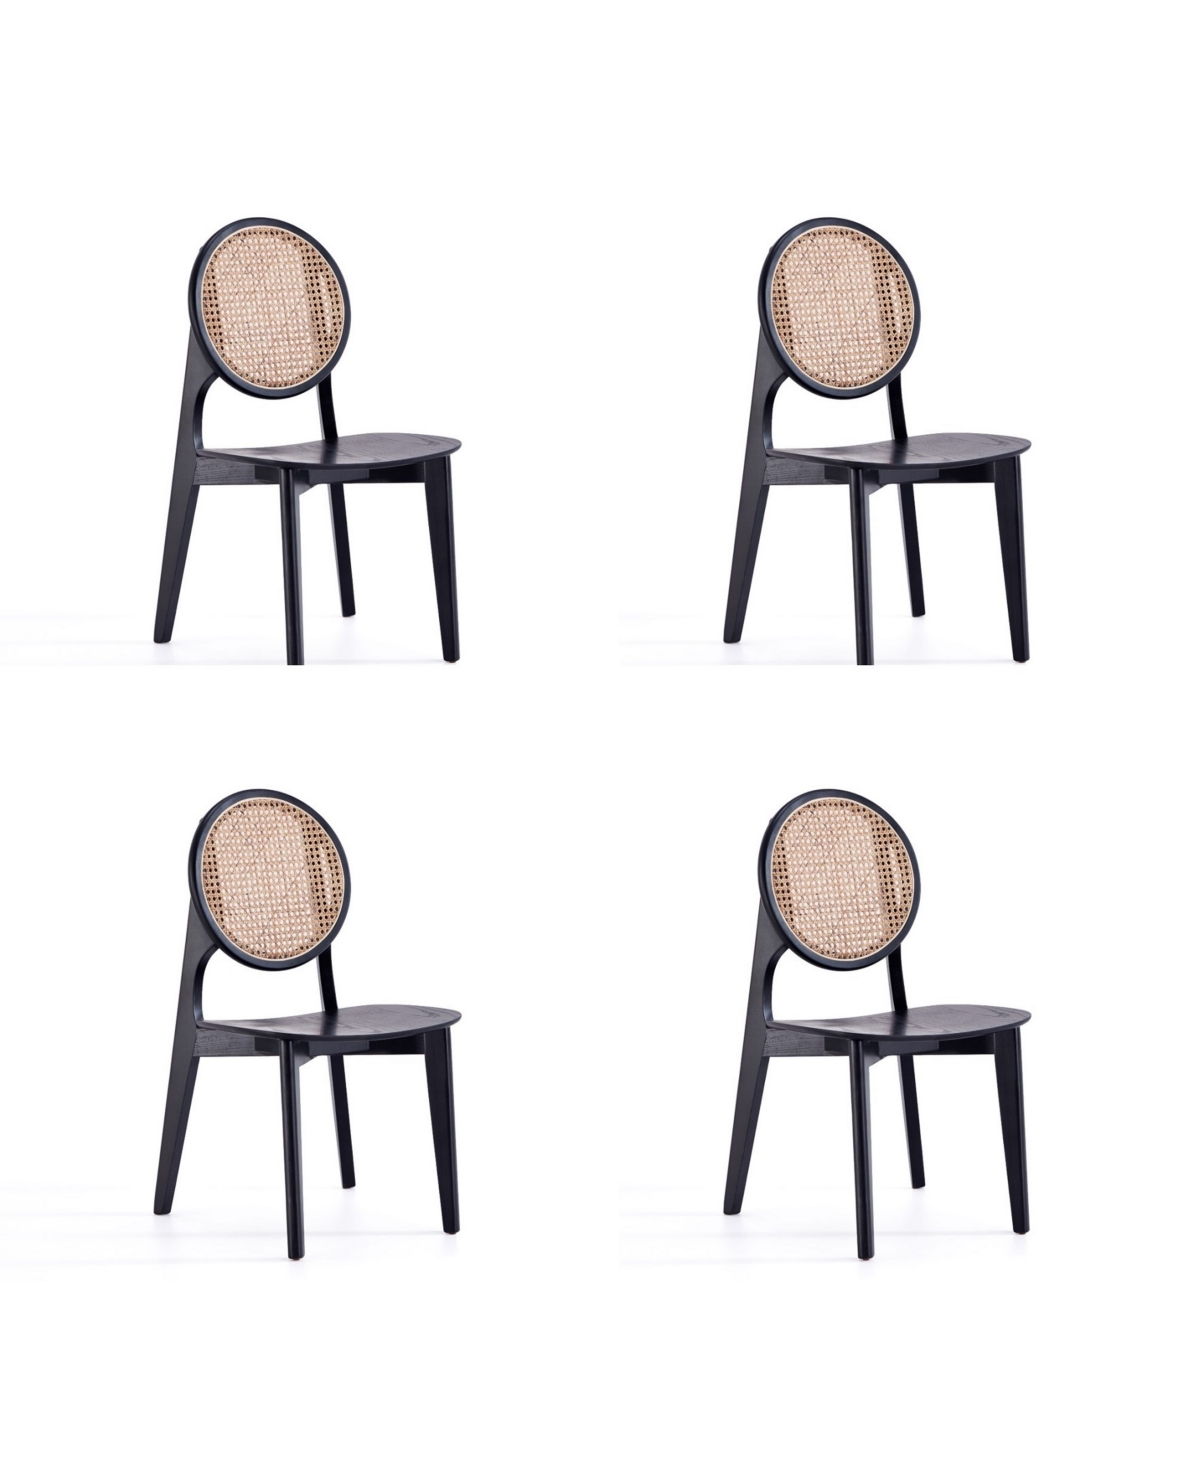 Manhattan Comfort Versailles 4-piece Round Ash Wood And Natural Cane Dining Chair In Black And Natural Cane